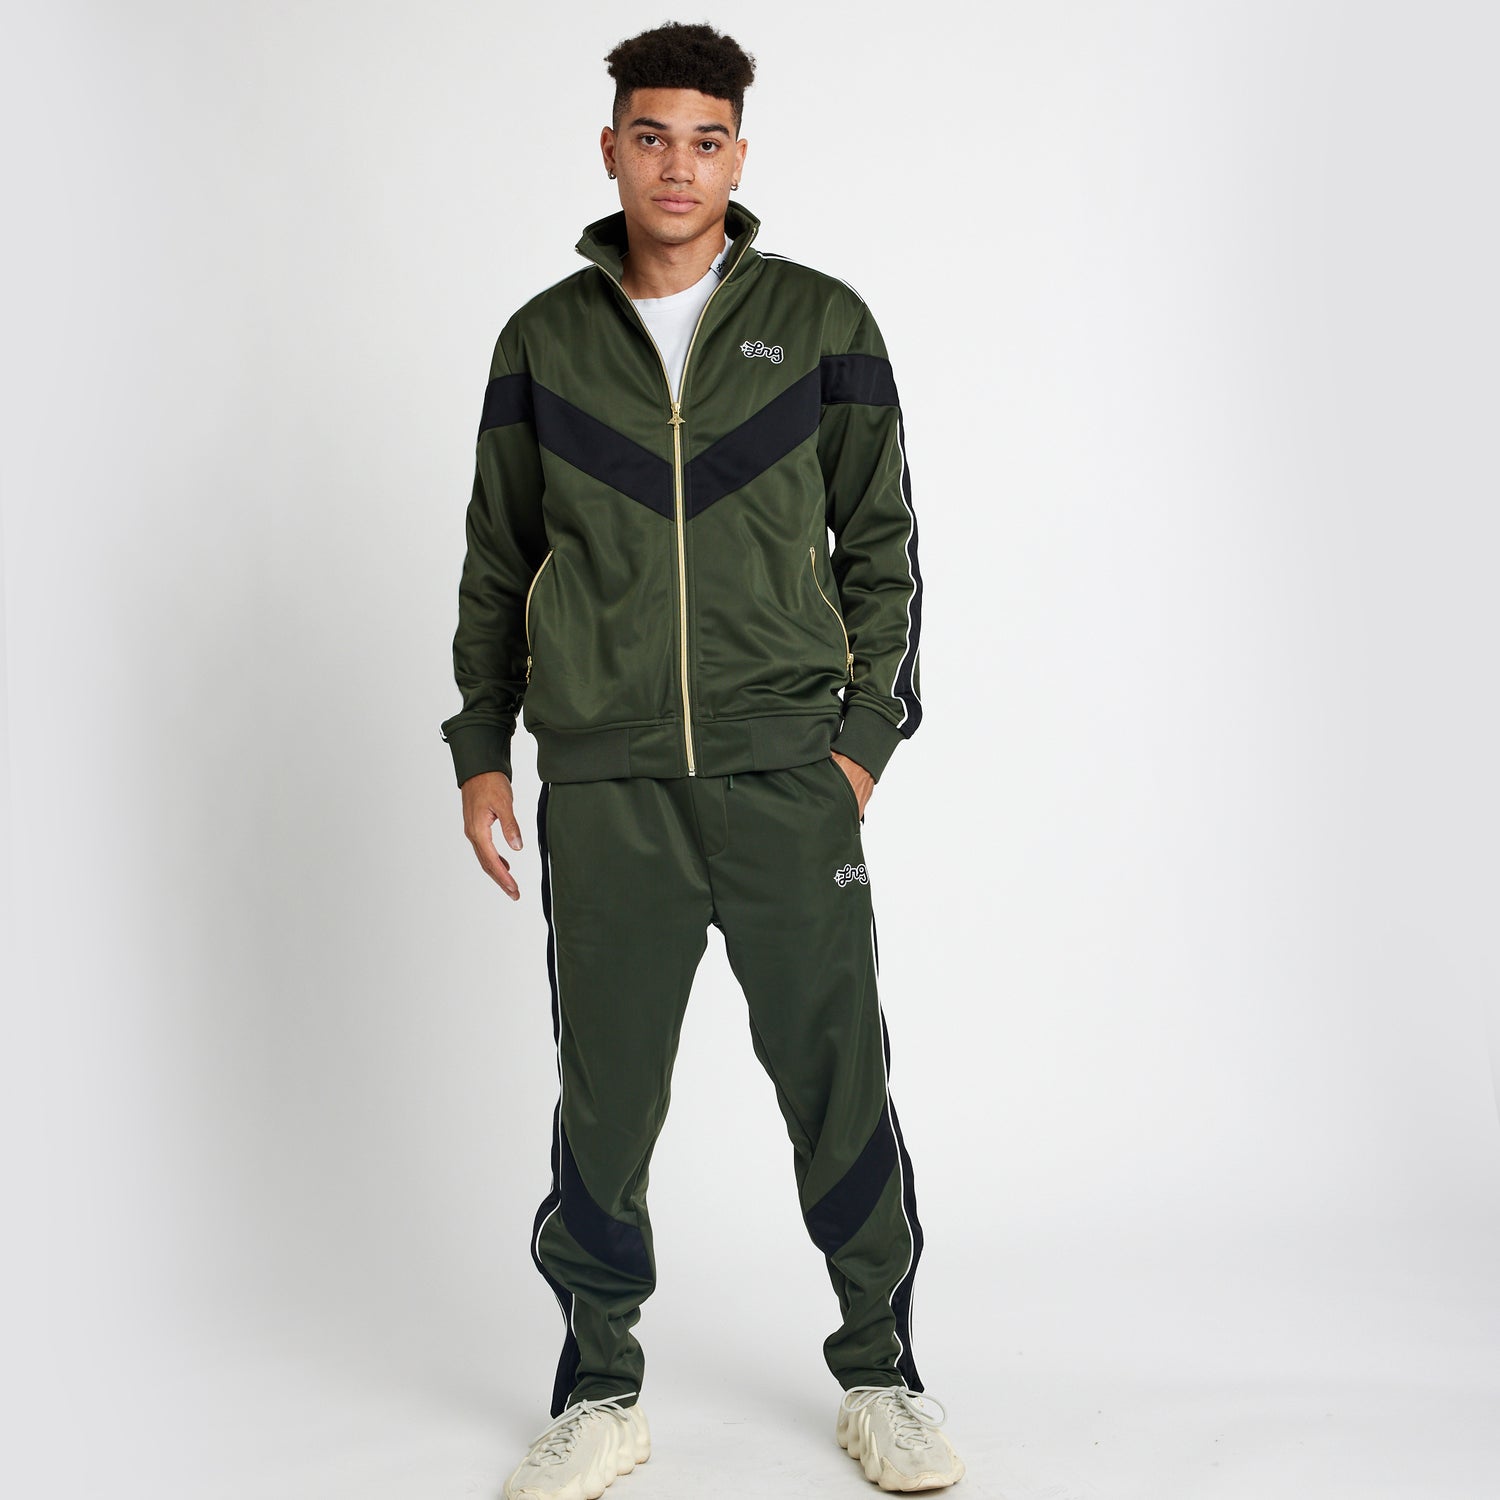 Men's Gran 3-in-1 Proof Jacket Seaweed green/Olive green | Buy Men's Gran  3-in-1 Proof Jacket Seaweed green/Olive green here | Outnorth